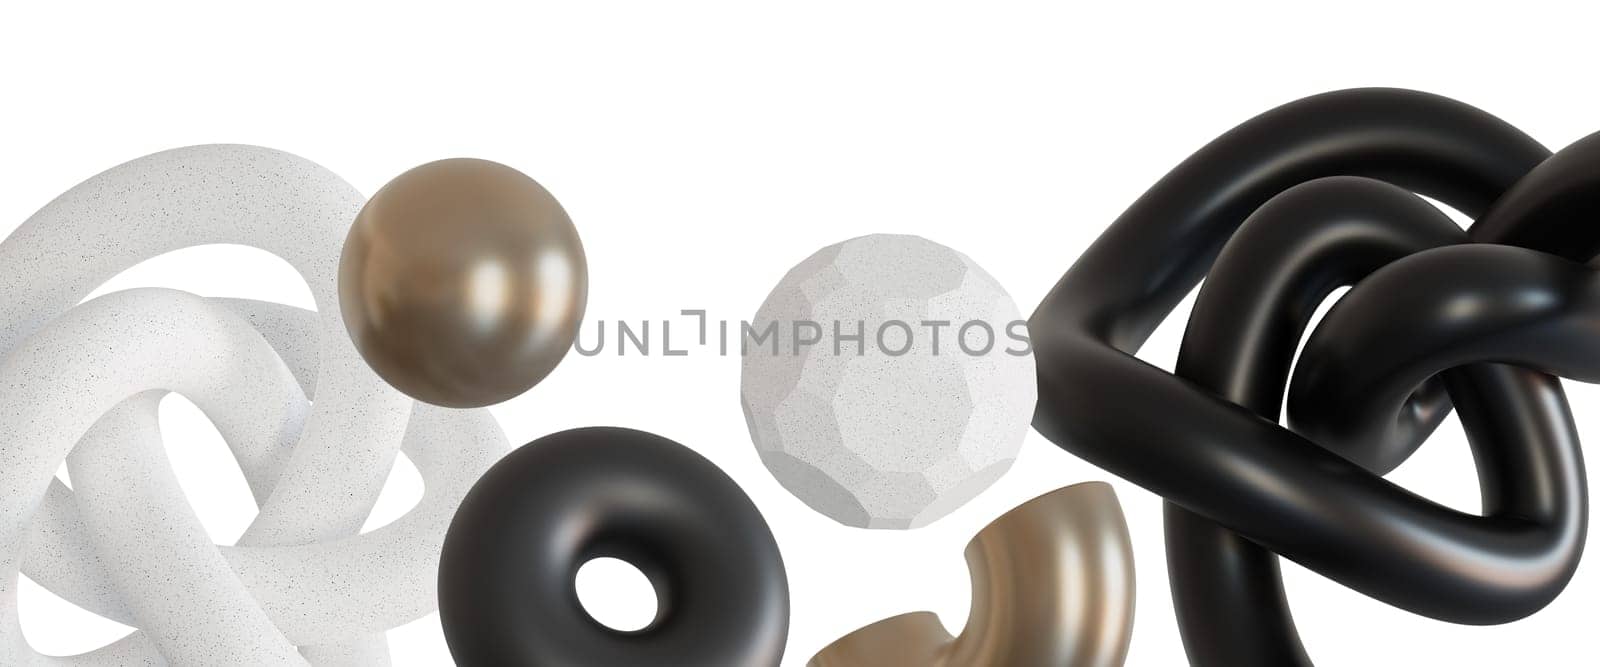 Elegant, minimalistic footer with abstract, floating black, white and metallic 3D shapes, isolated on white background. Modern border. Neutral tones. Bottom of the sheet. 3D render